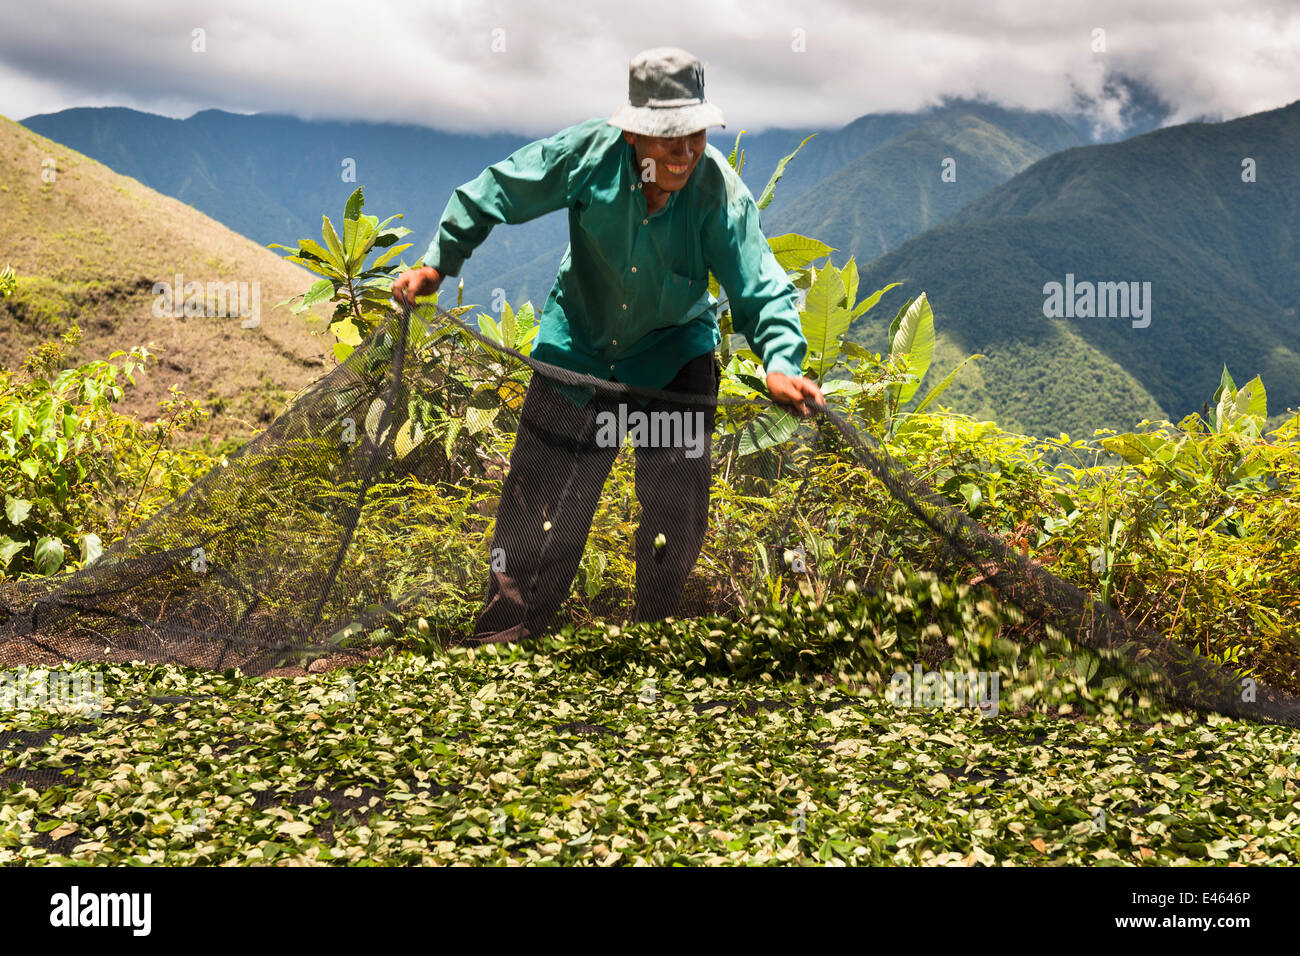 Man gathering crop of Coca (Erythroxylum coca) leaves using a net, the leaves are harvested six times a year, Bolivia, November Stock Photo